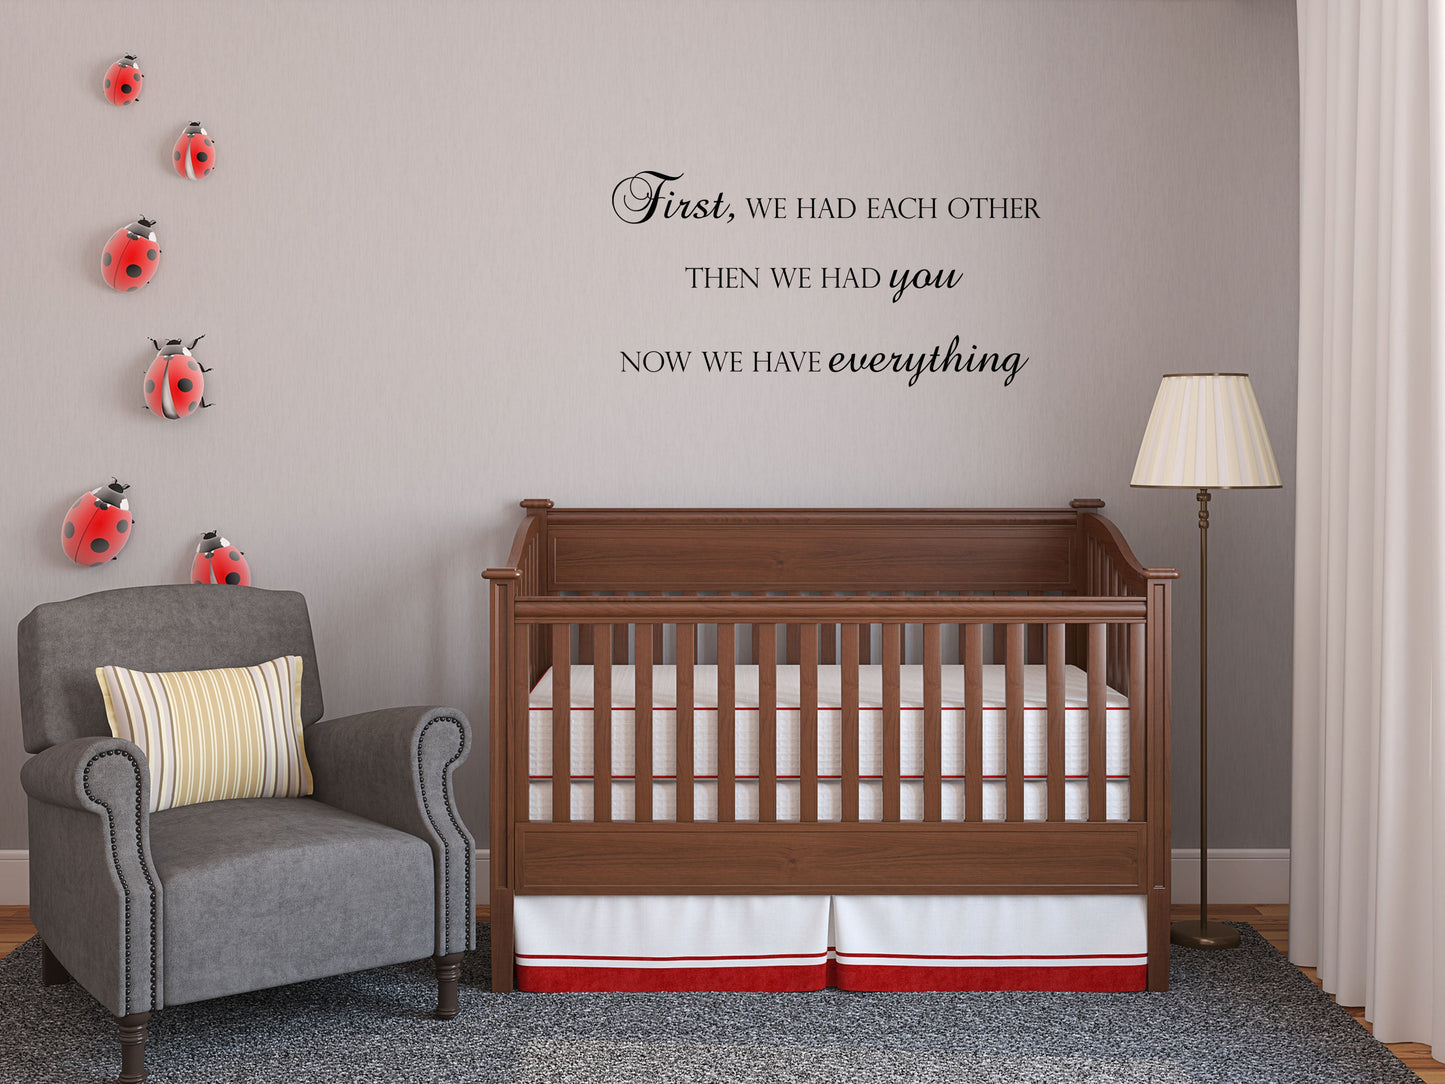 First We Had Each Other Nursery Wall Decal - Baby Room Wall Decal - Girl's Bedroom Decal Vinyl Wall Decal Title Done 